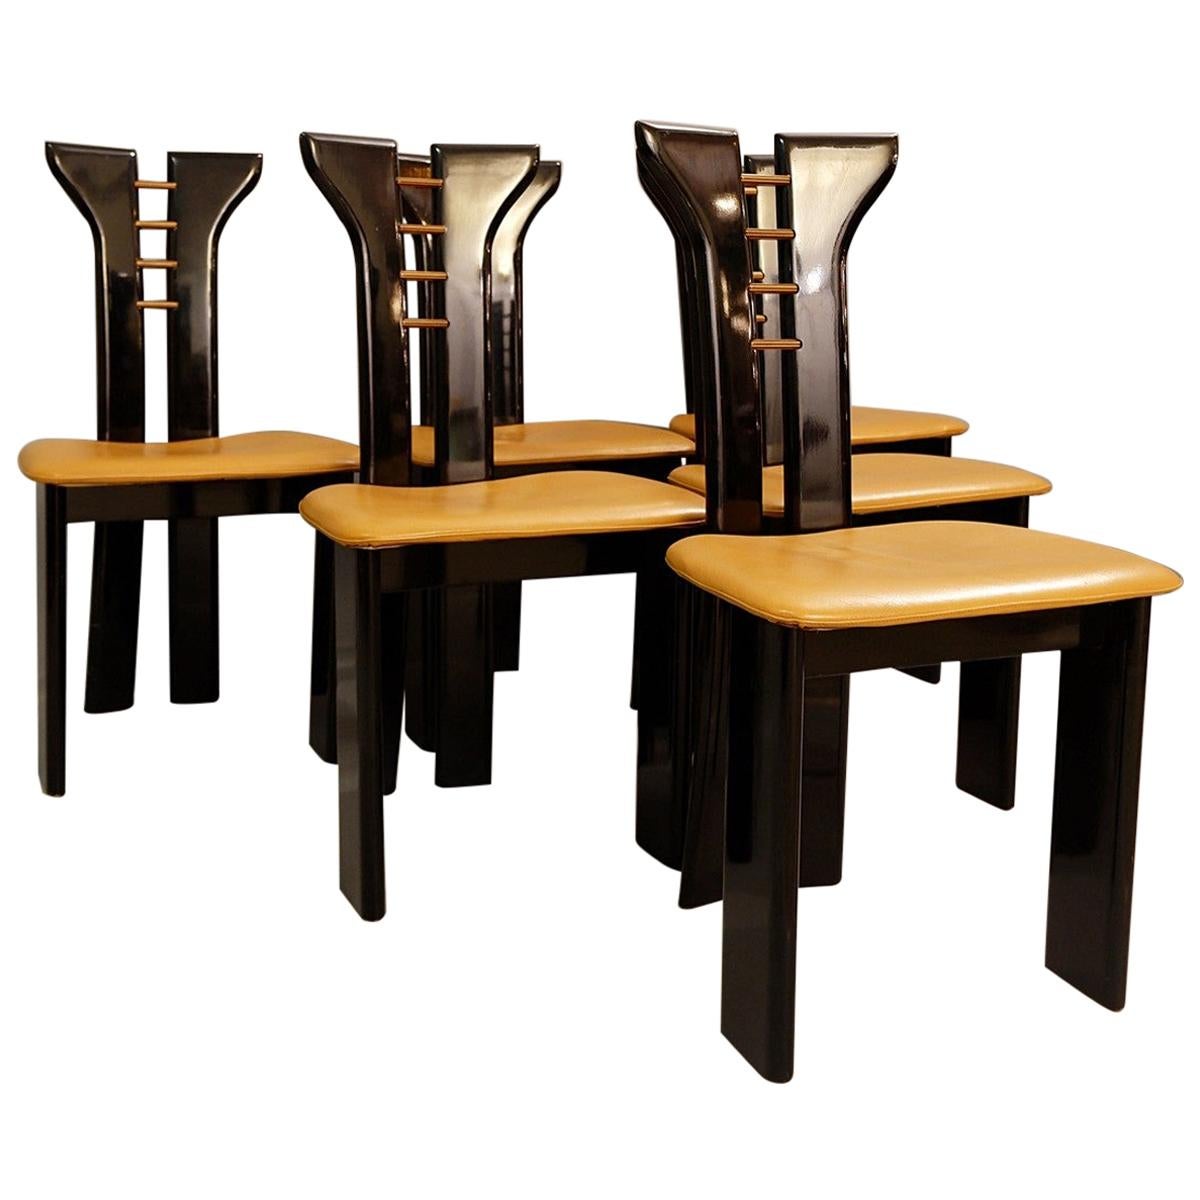 Set of 6 Sculptural 1970s Black Lacquer Pierre Cardin Chairs with Leather Seats